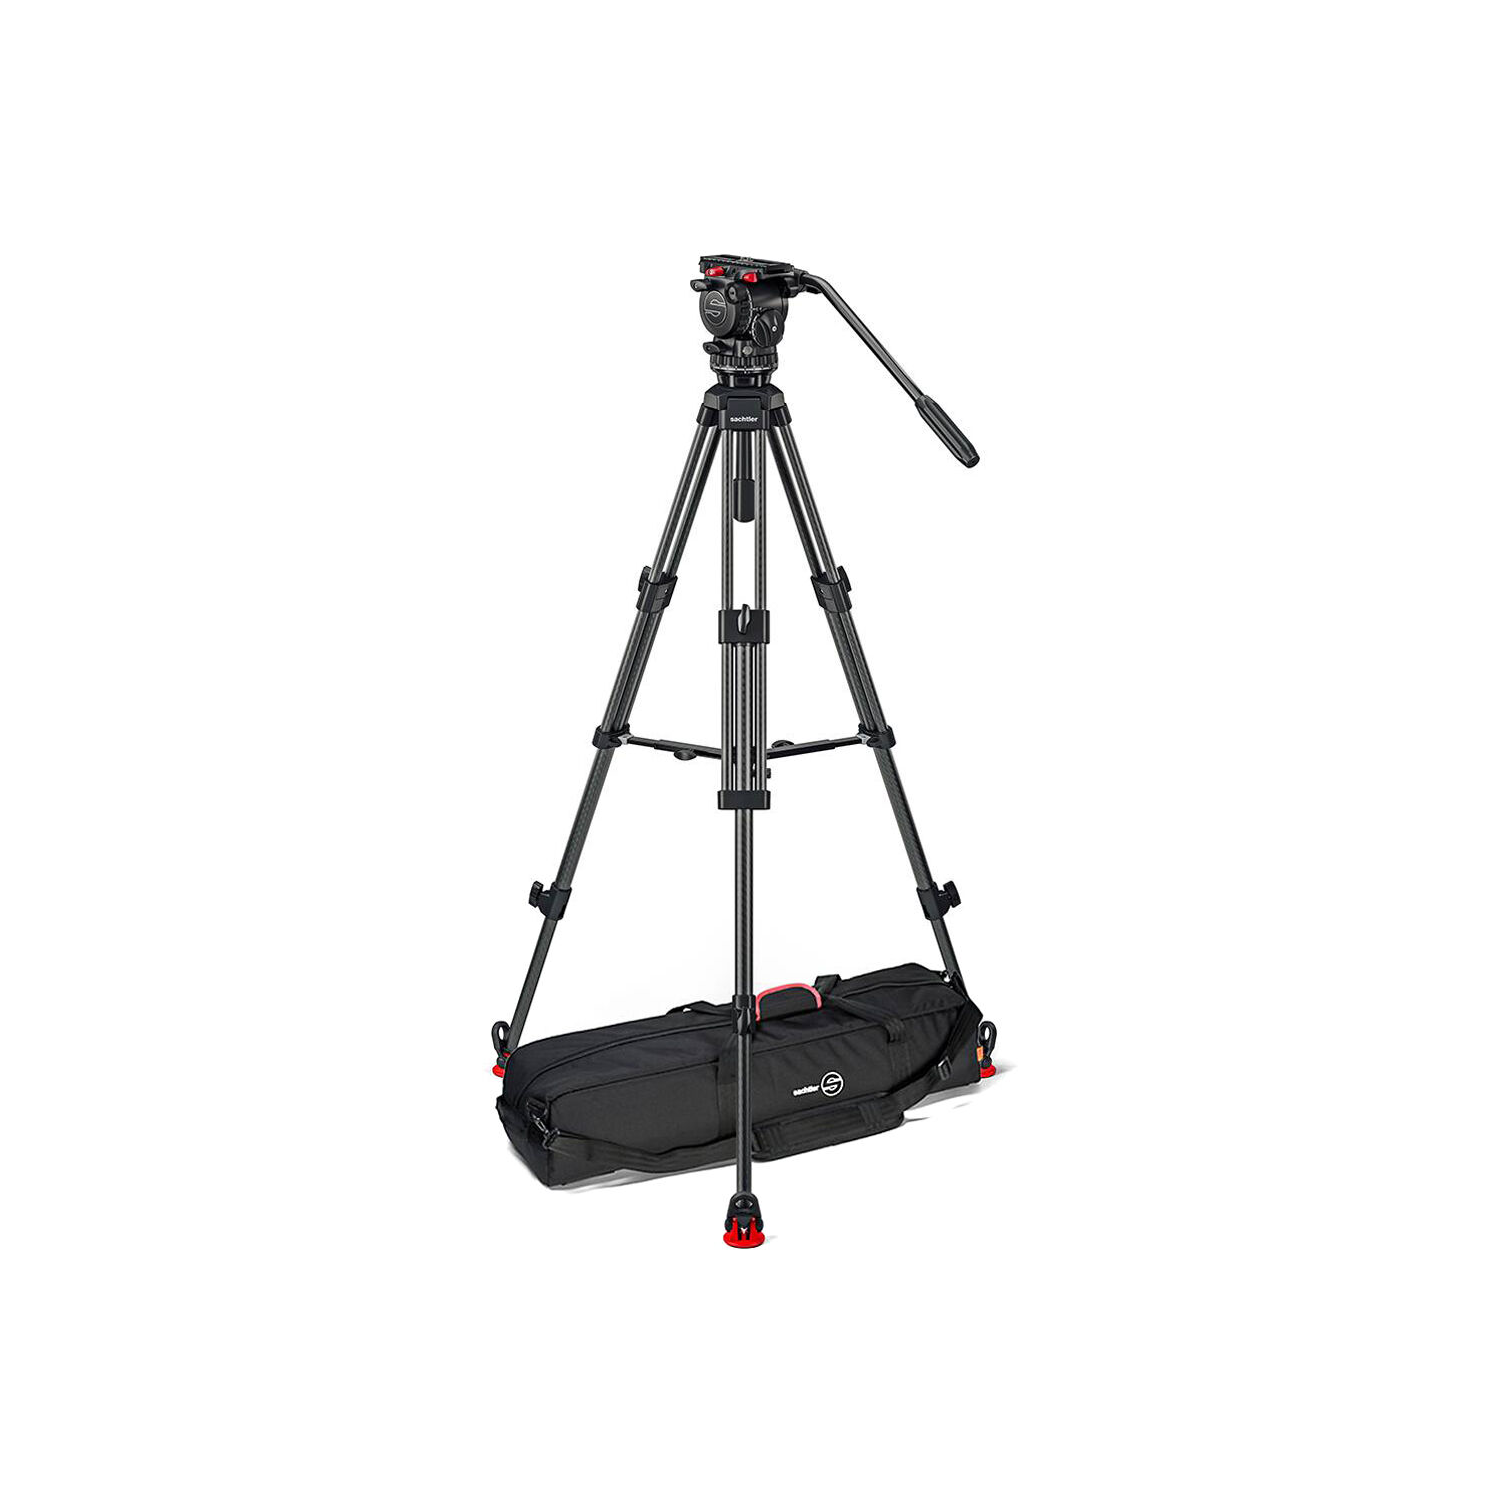 Sachtler System FSB 8 Mk II Sideload and 75/2 Carbon Fiber Tripod Legs with Mid-Level Spreader and Bag